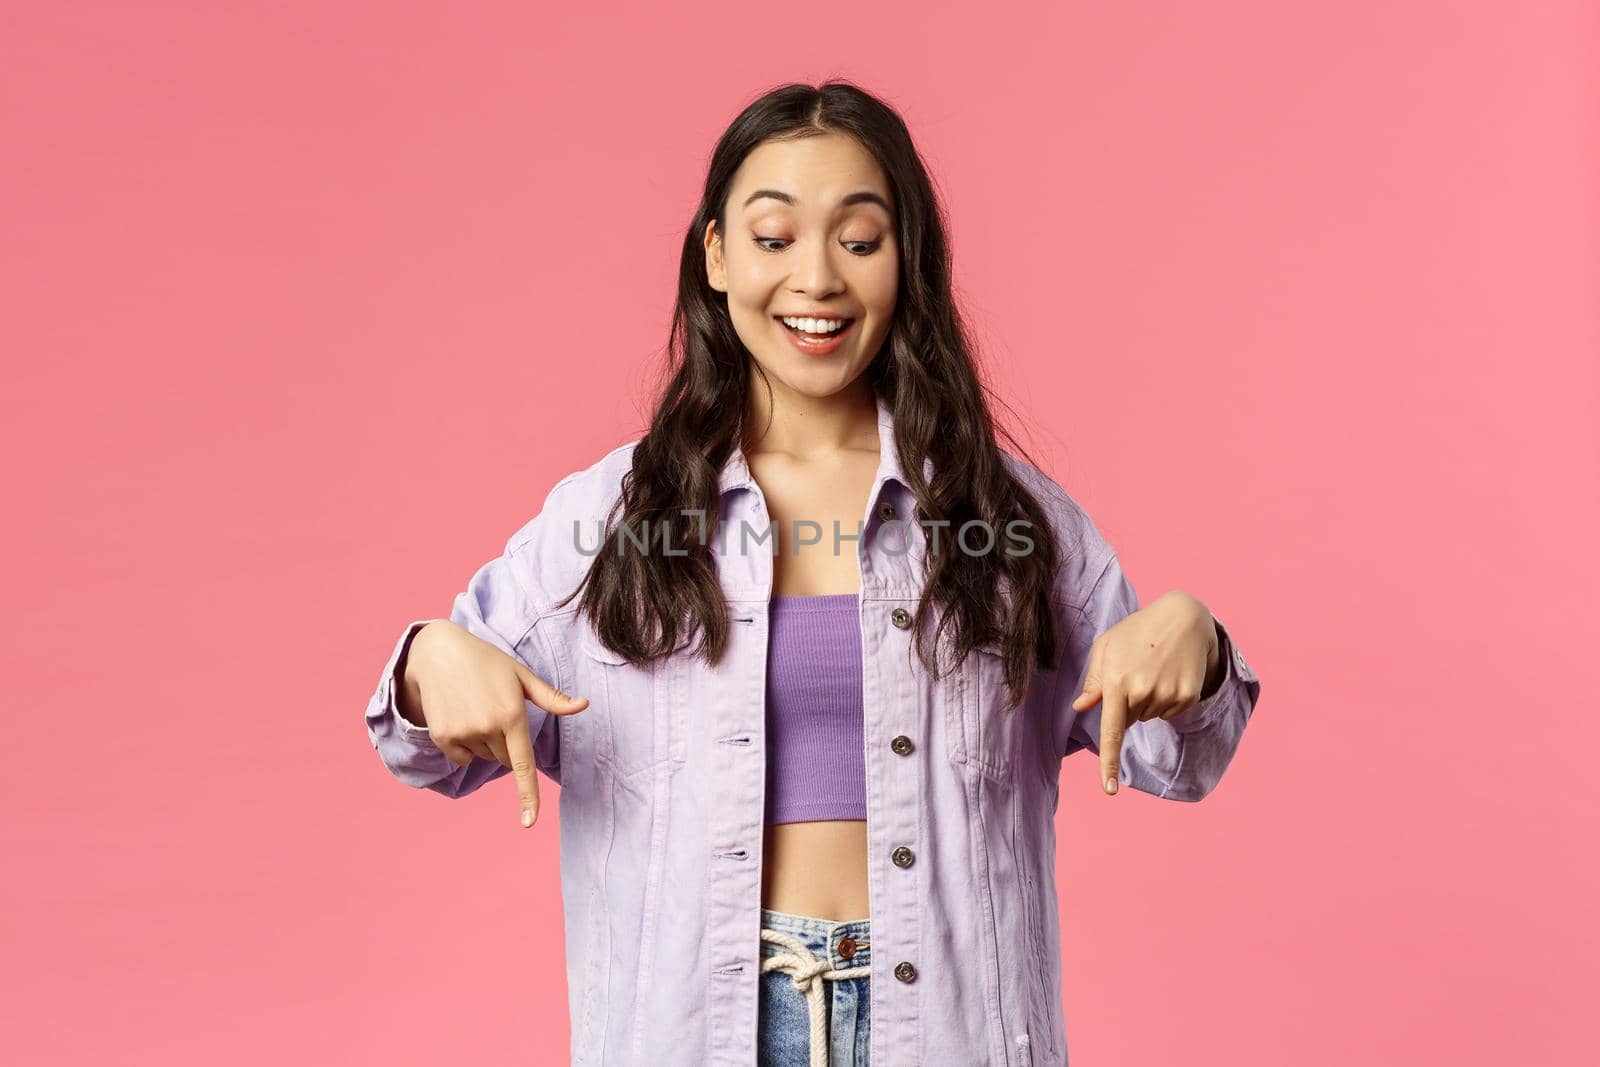 Portrait of curious good-looking, stylish female in denim jacket over crop-top, smiling excited and looking pointing fingers down at something interesting and unsual, stand pink background.